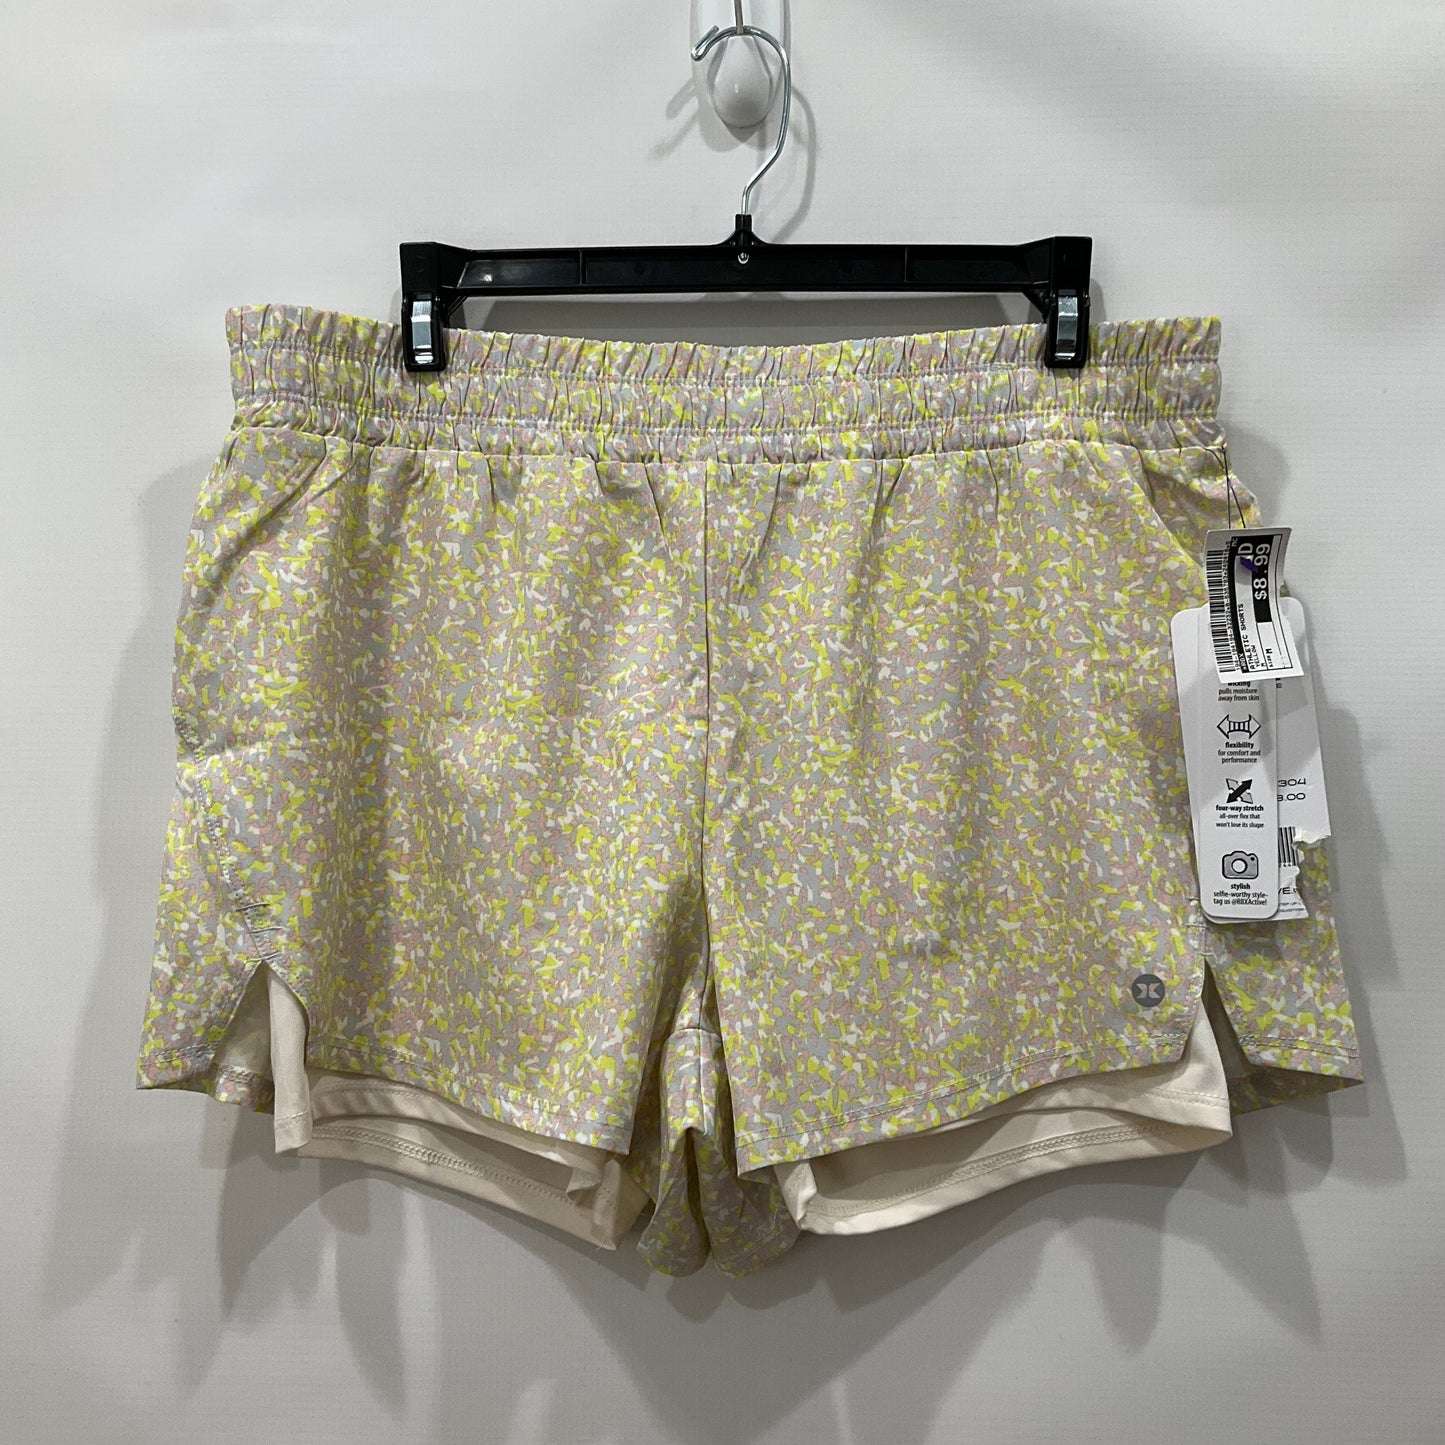 Yellow Athletic Shorts Rbx, Size M